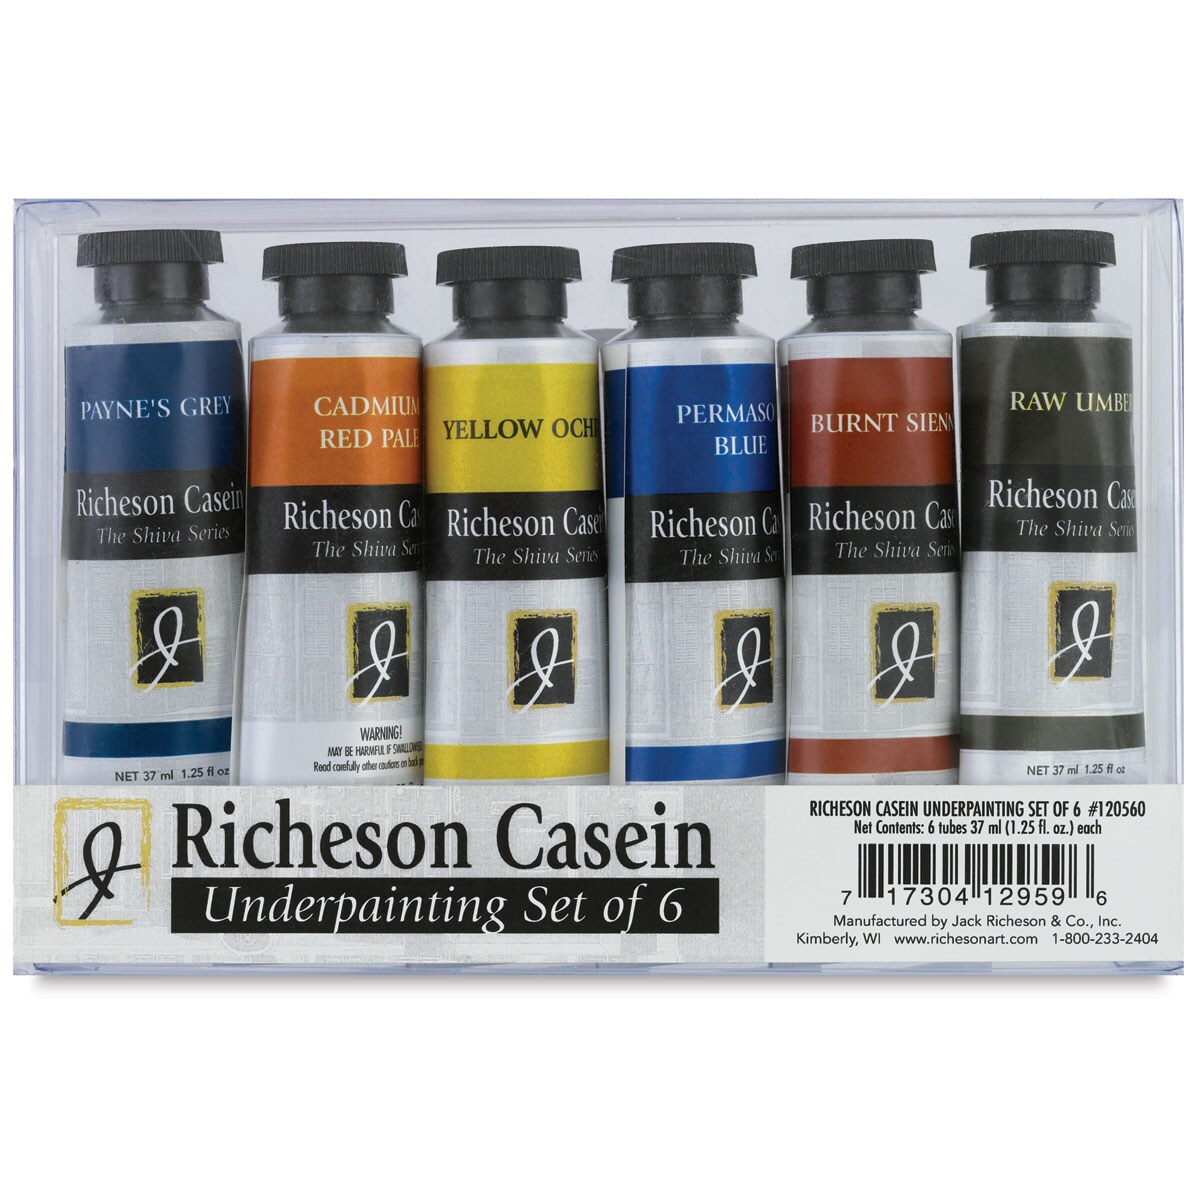 Richeson Casein Paint the Shiva Series - Underpainting Set, Set of 6 Colors, 37 ml Tubes